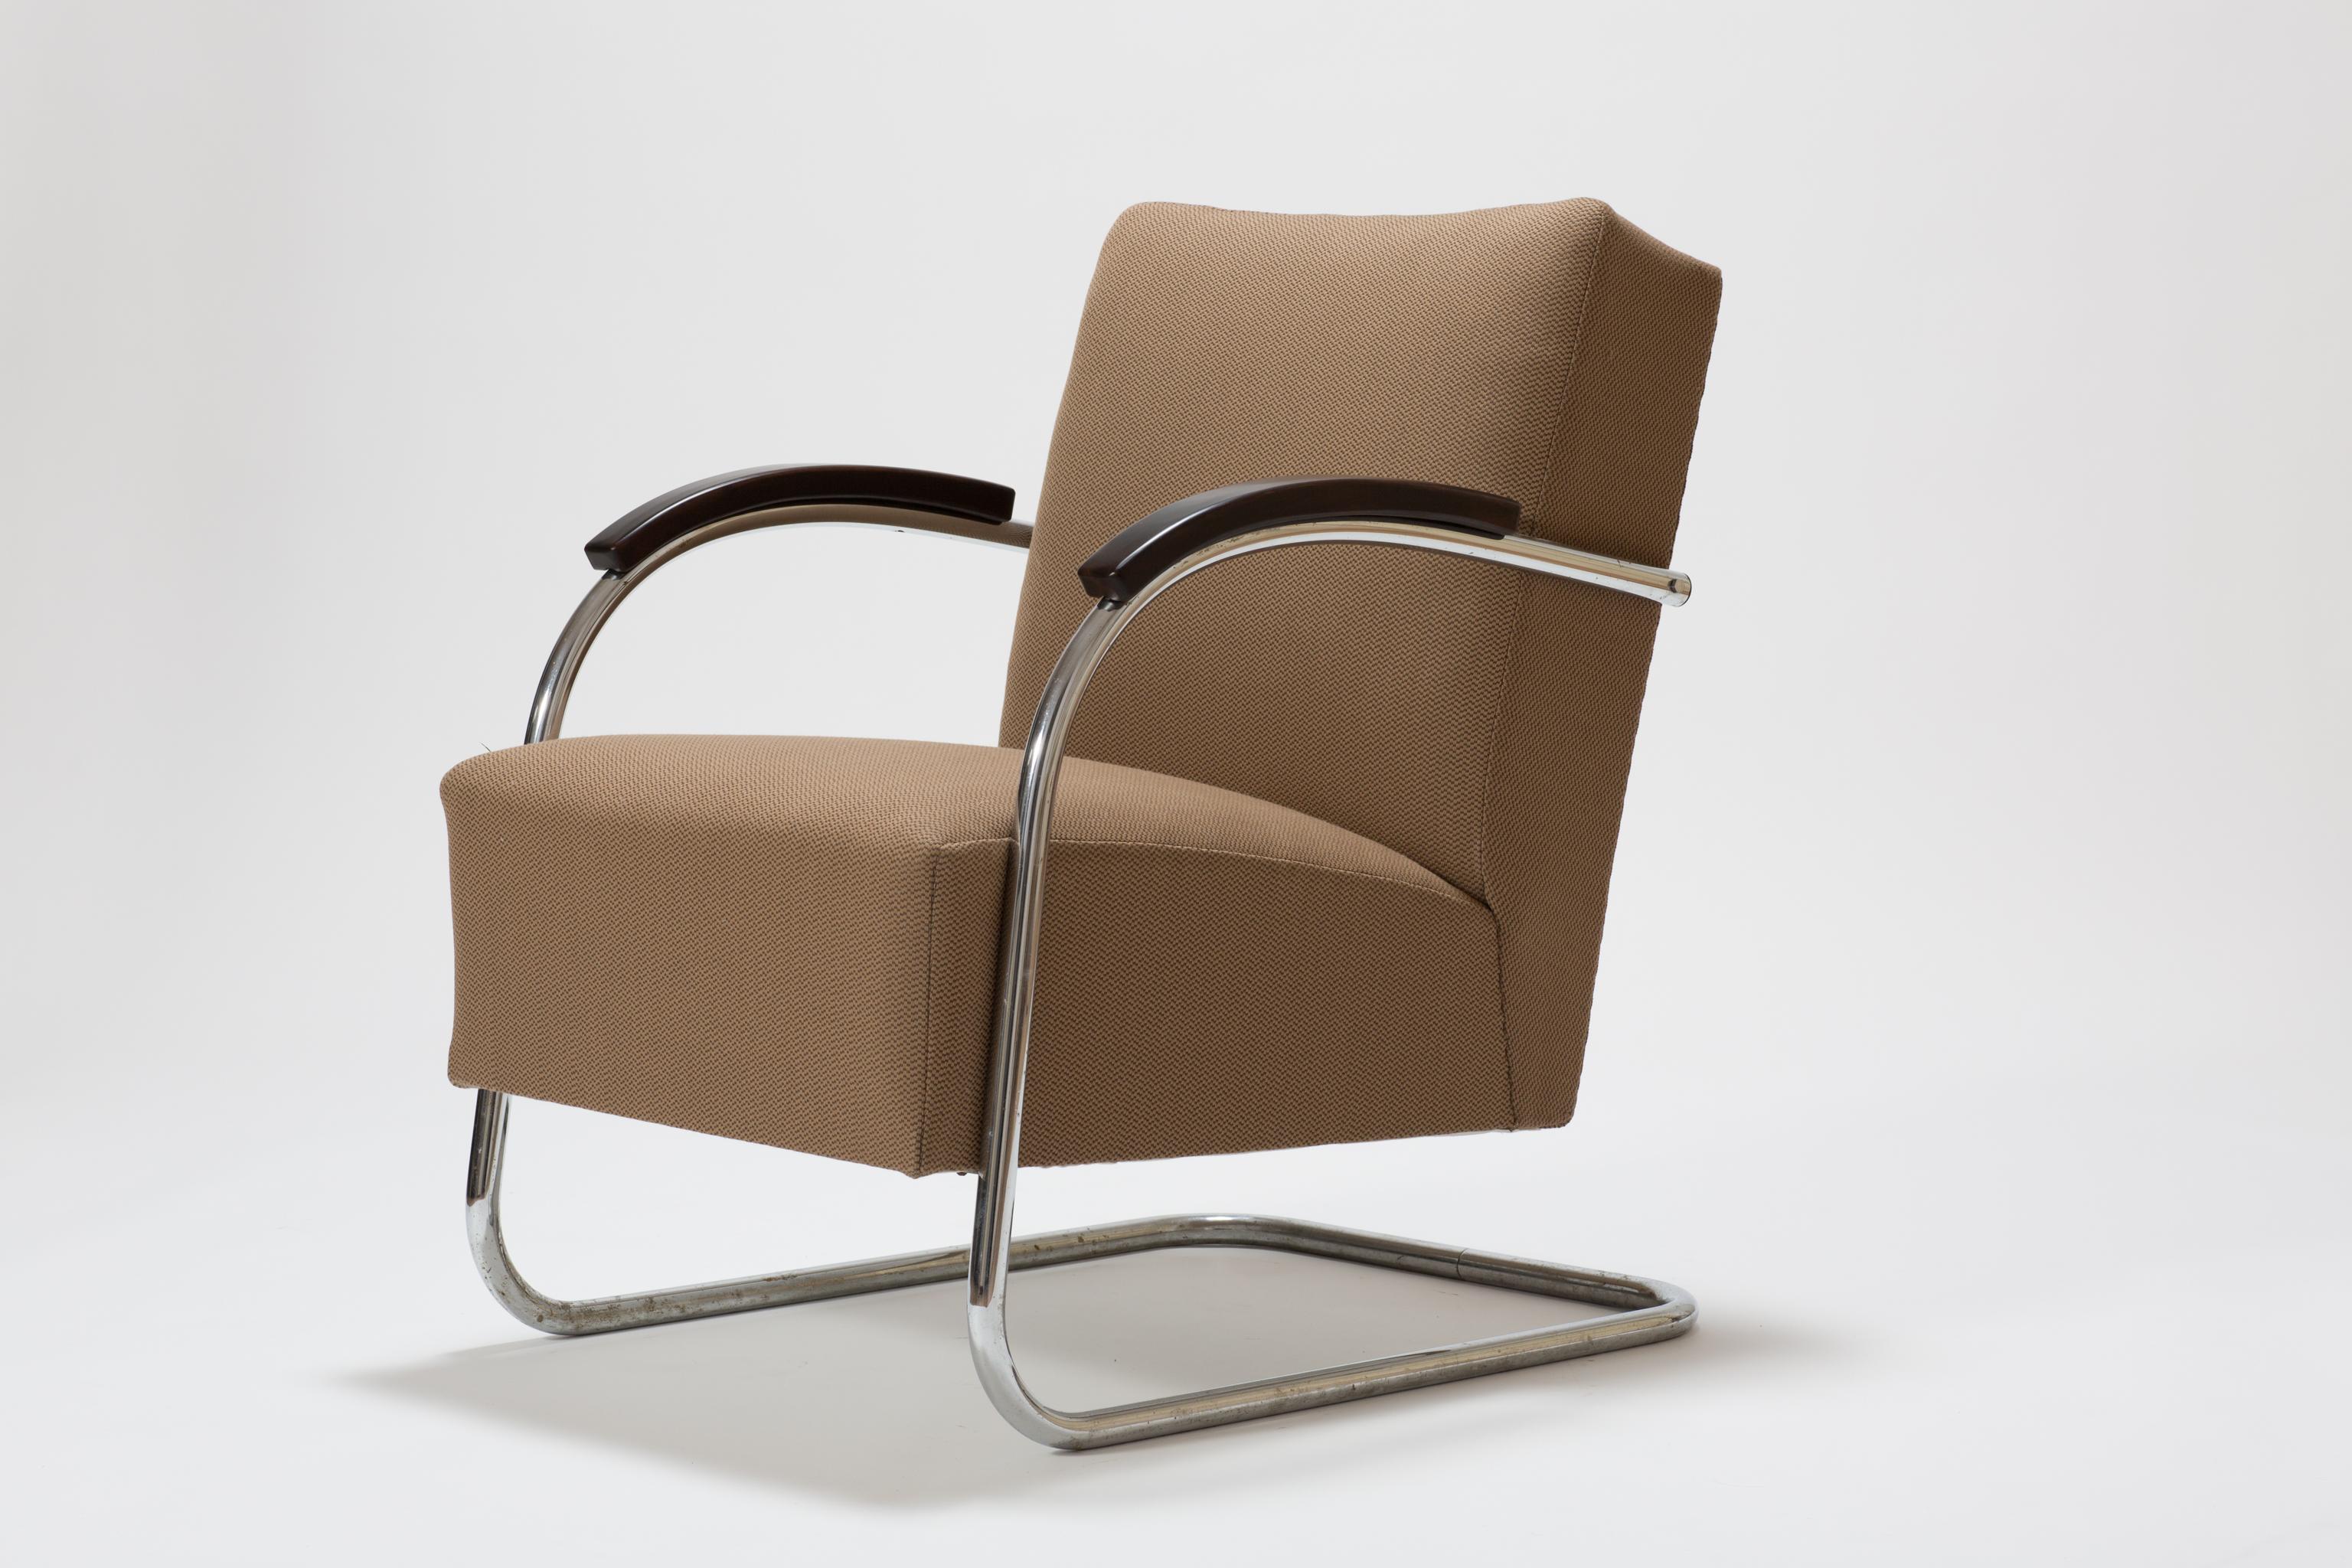 A pair of original midcentury Bauhaus armchairs from the 1930s produced by Mücke-Melder. The cantilever lounge chairs are a typical representation for the German and Austrian Bauhaus Era. The midcentury lounge chairs have a tubular steel frame and